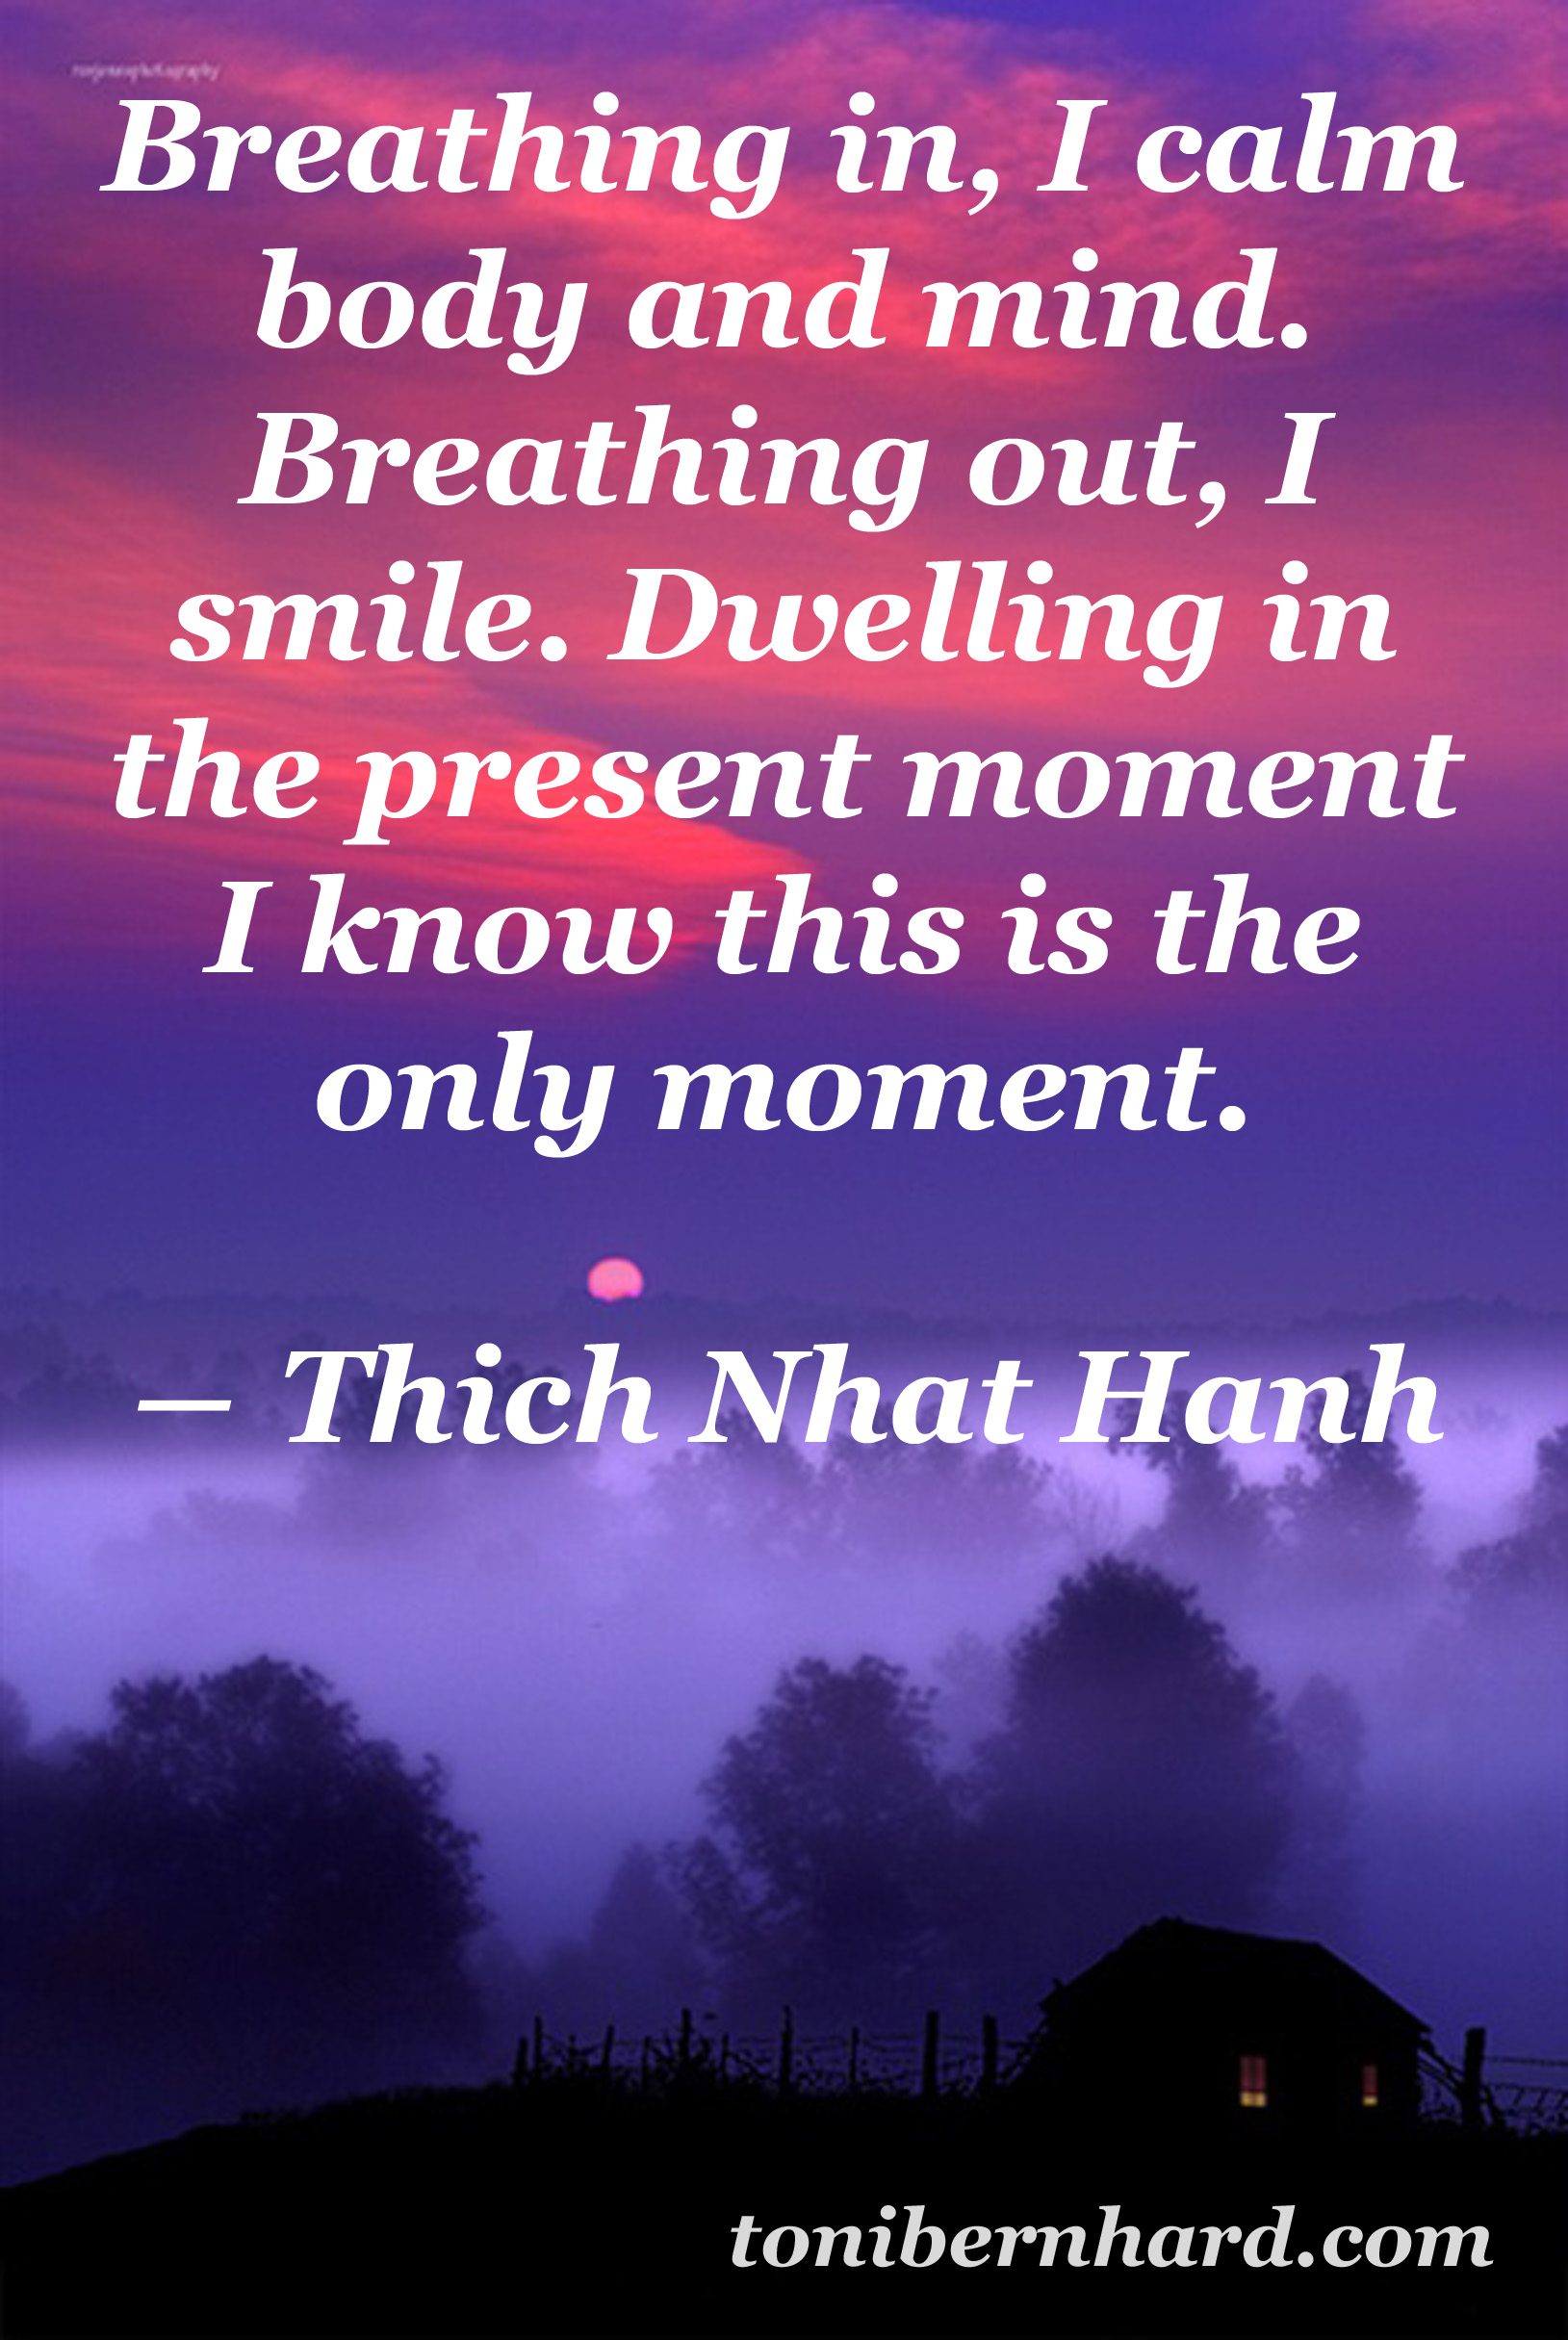 Thich Nhat Hanh Peace Quotes. QuotesGram